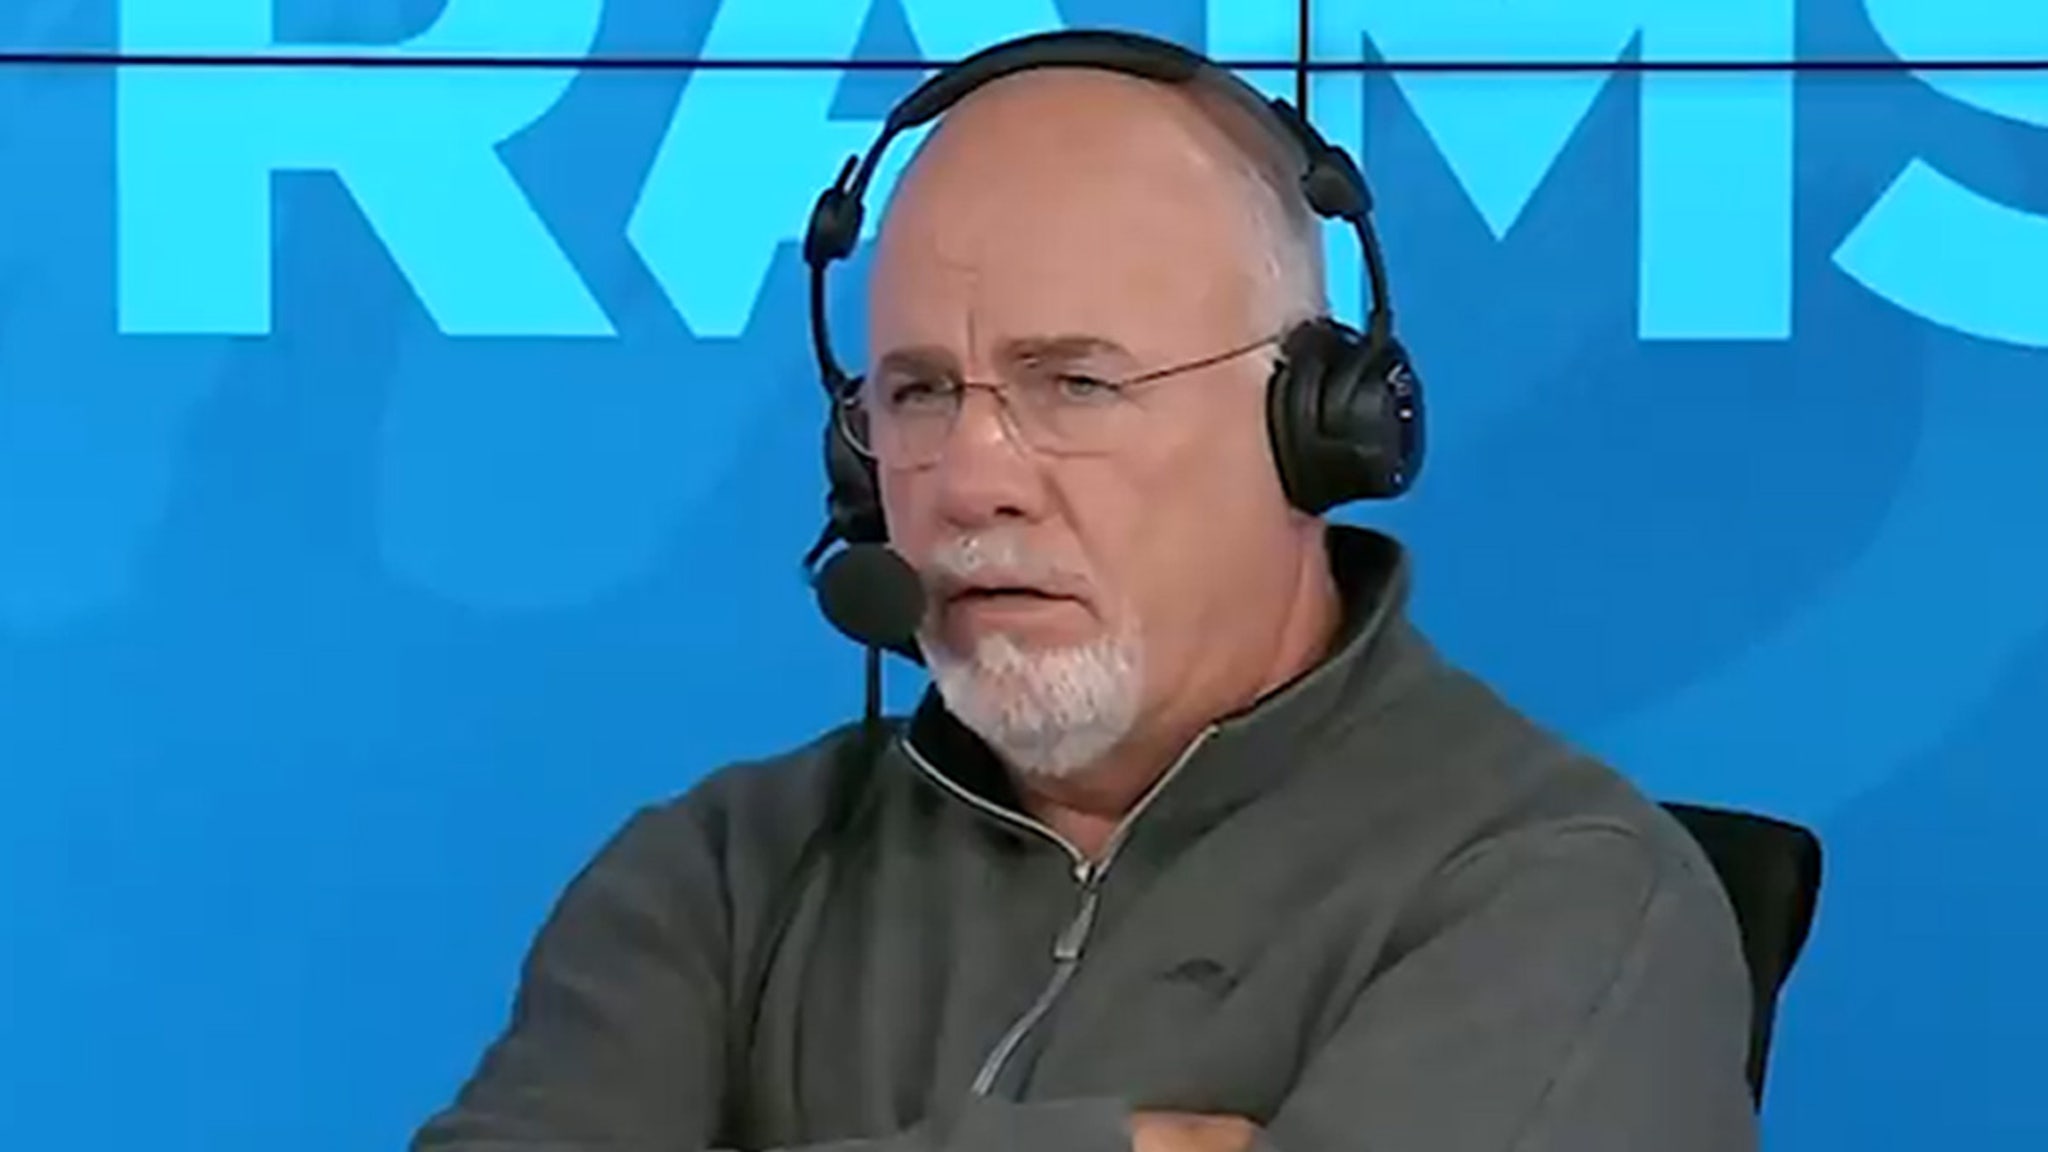 Radio Host Dave Ramsey Says Raising Rents Doesn’t Make One a Bad Christian